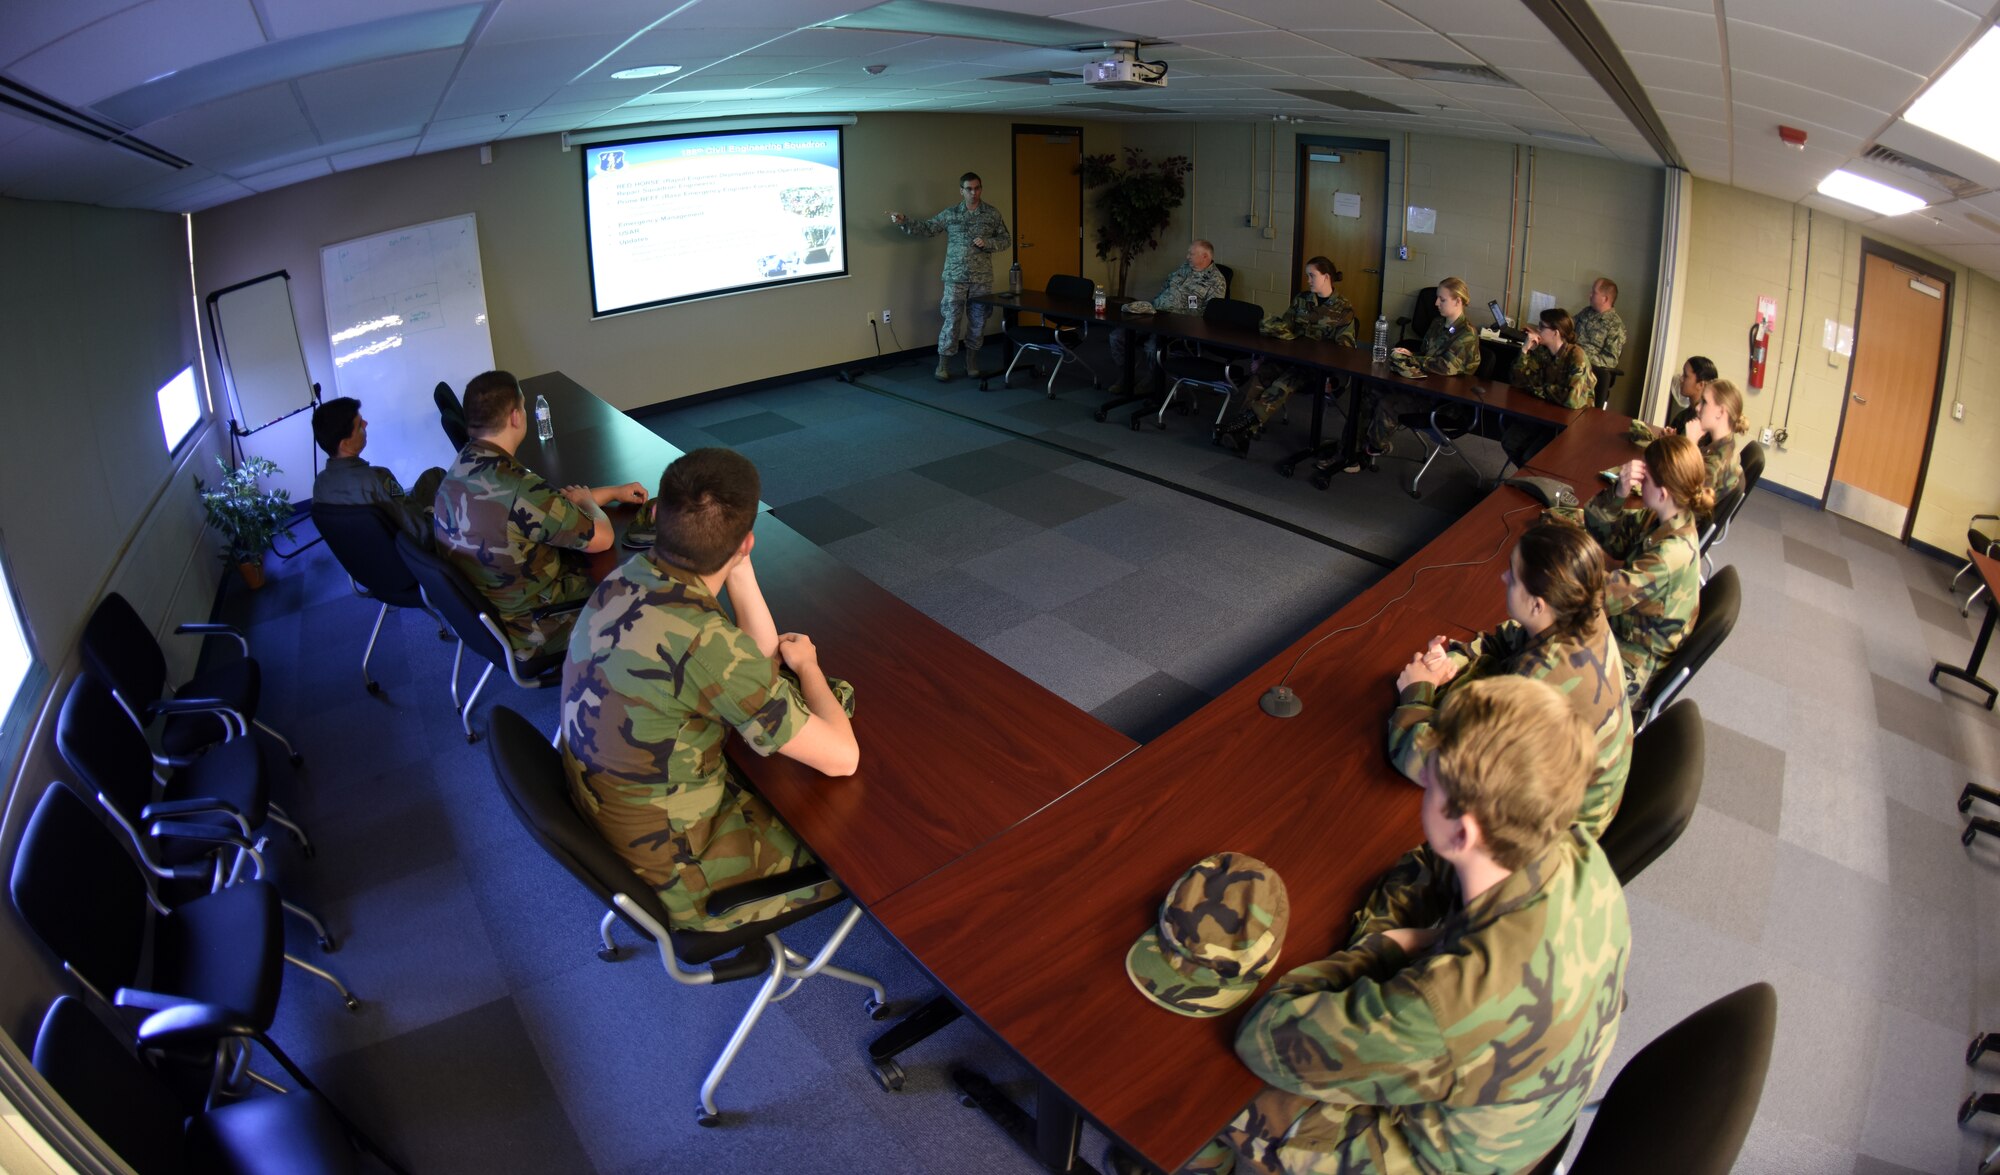 Members of the Greenwood High School Junior Reserve Officer Training Corps are shown the capabilities within the 188th Intelligence Support Squadron by Chief Master Sgt. Carl Schneider, 188th ISS superintendent, April 13, 2016, during their tour of Ebbing Air National Guard Base, Fort Smith, Ark. JROTC cadets viewed many of the career opportunities provided on base, including being a remotely piloted aircraft pilot, security forces member or working in intelligence. (U.S. Air National Guard photo by Senior Airman Cody Martin/Released)